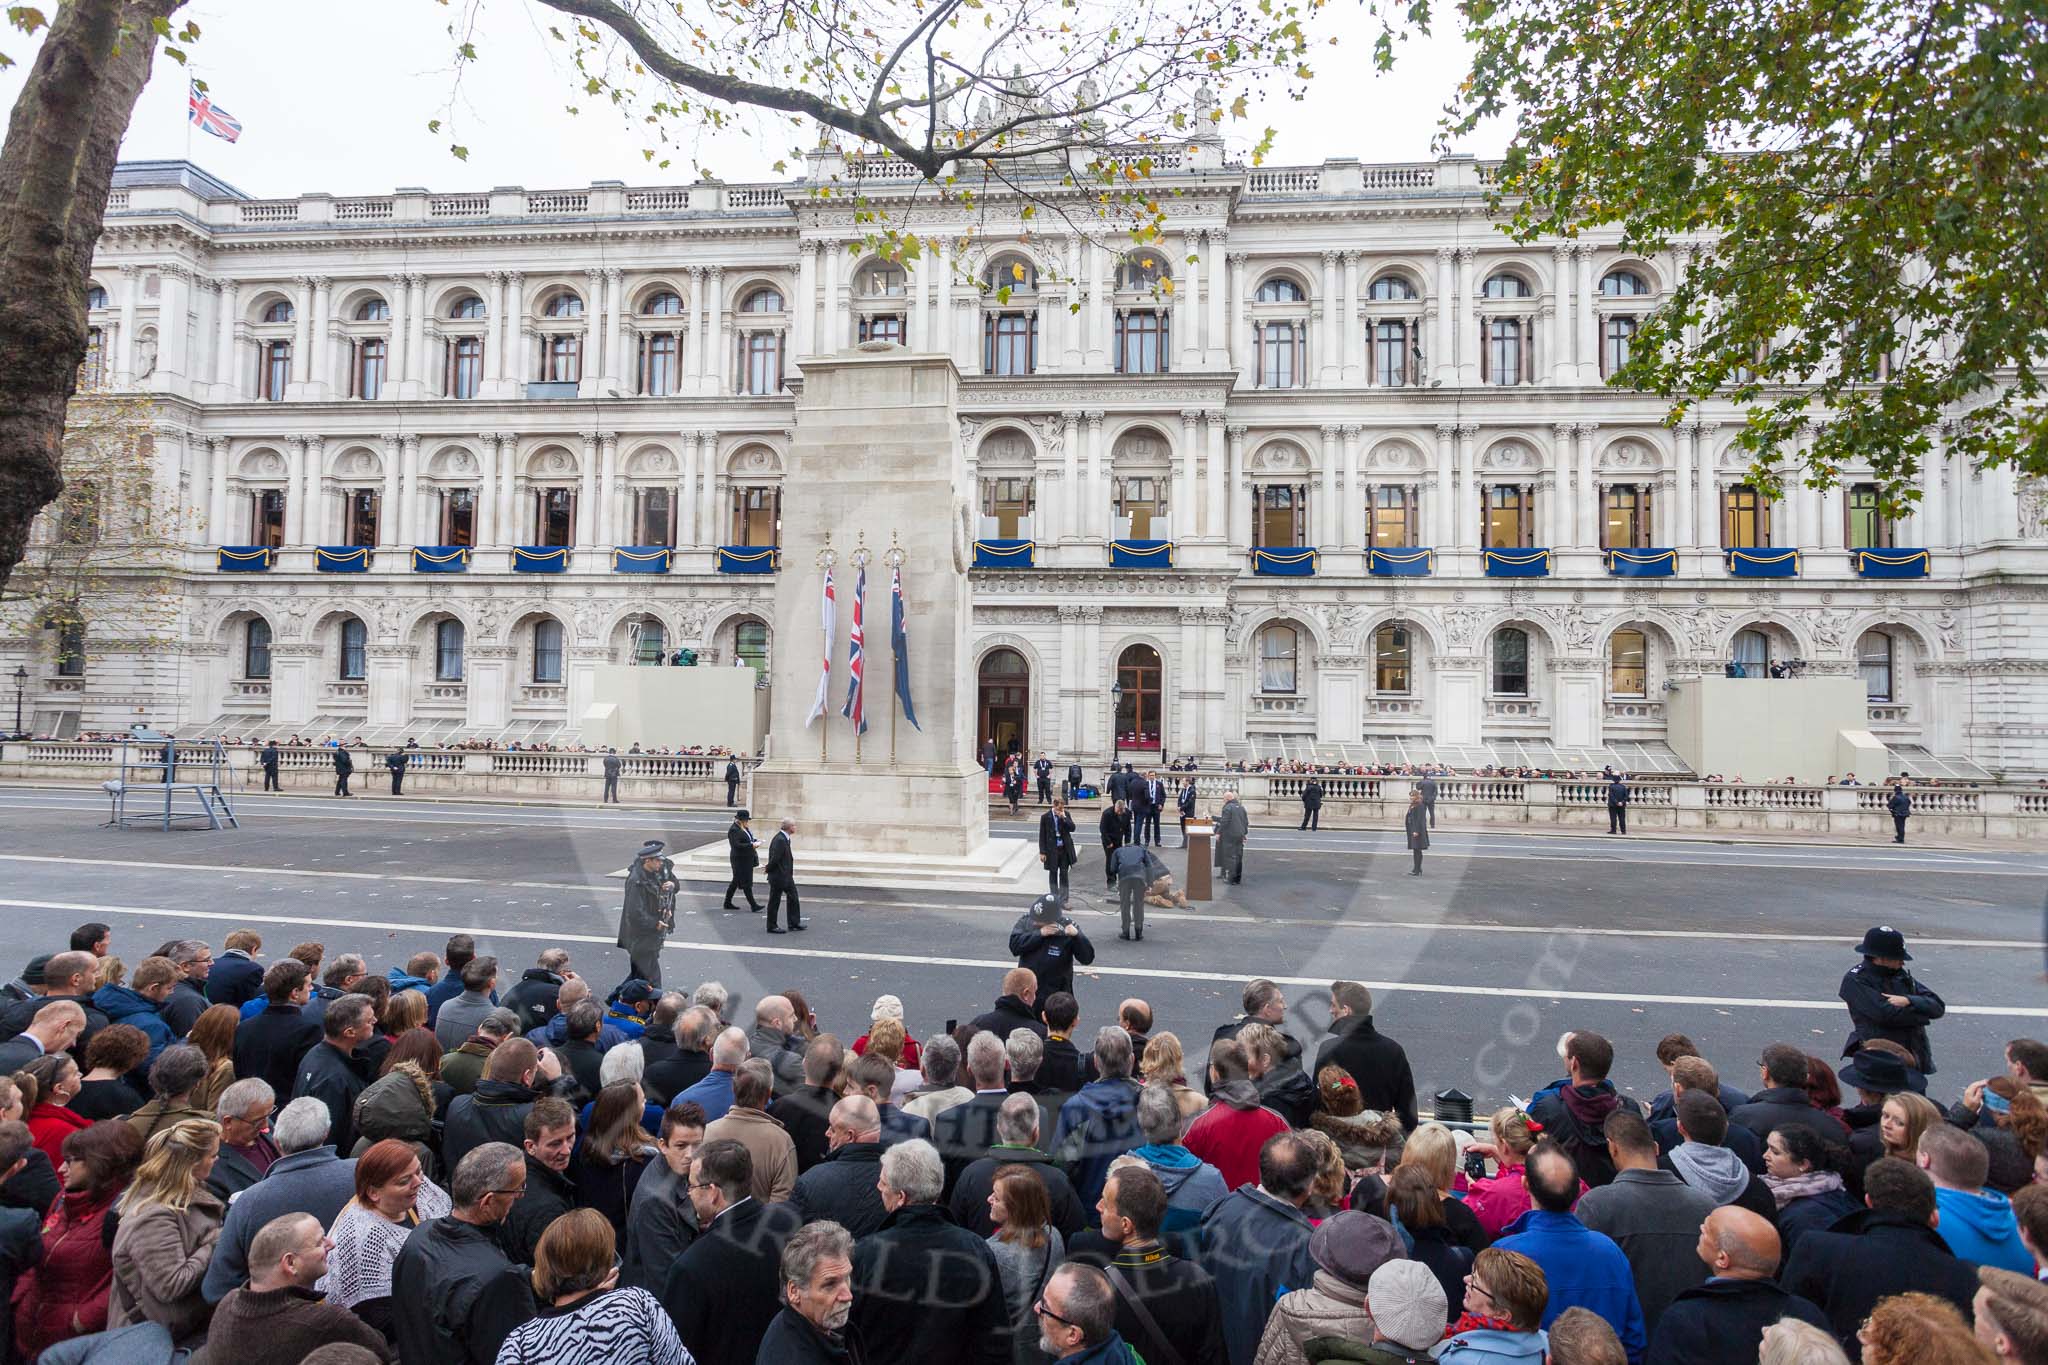 Remembrance Sunday at the Cenotaph 2015: 9am, already a crowd at the Cenotaph. Image #6, 08 November 2015 08:58 Whitehall, London, UK